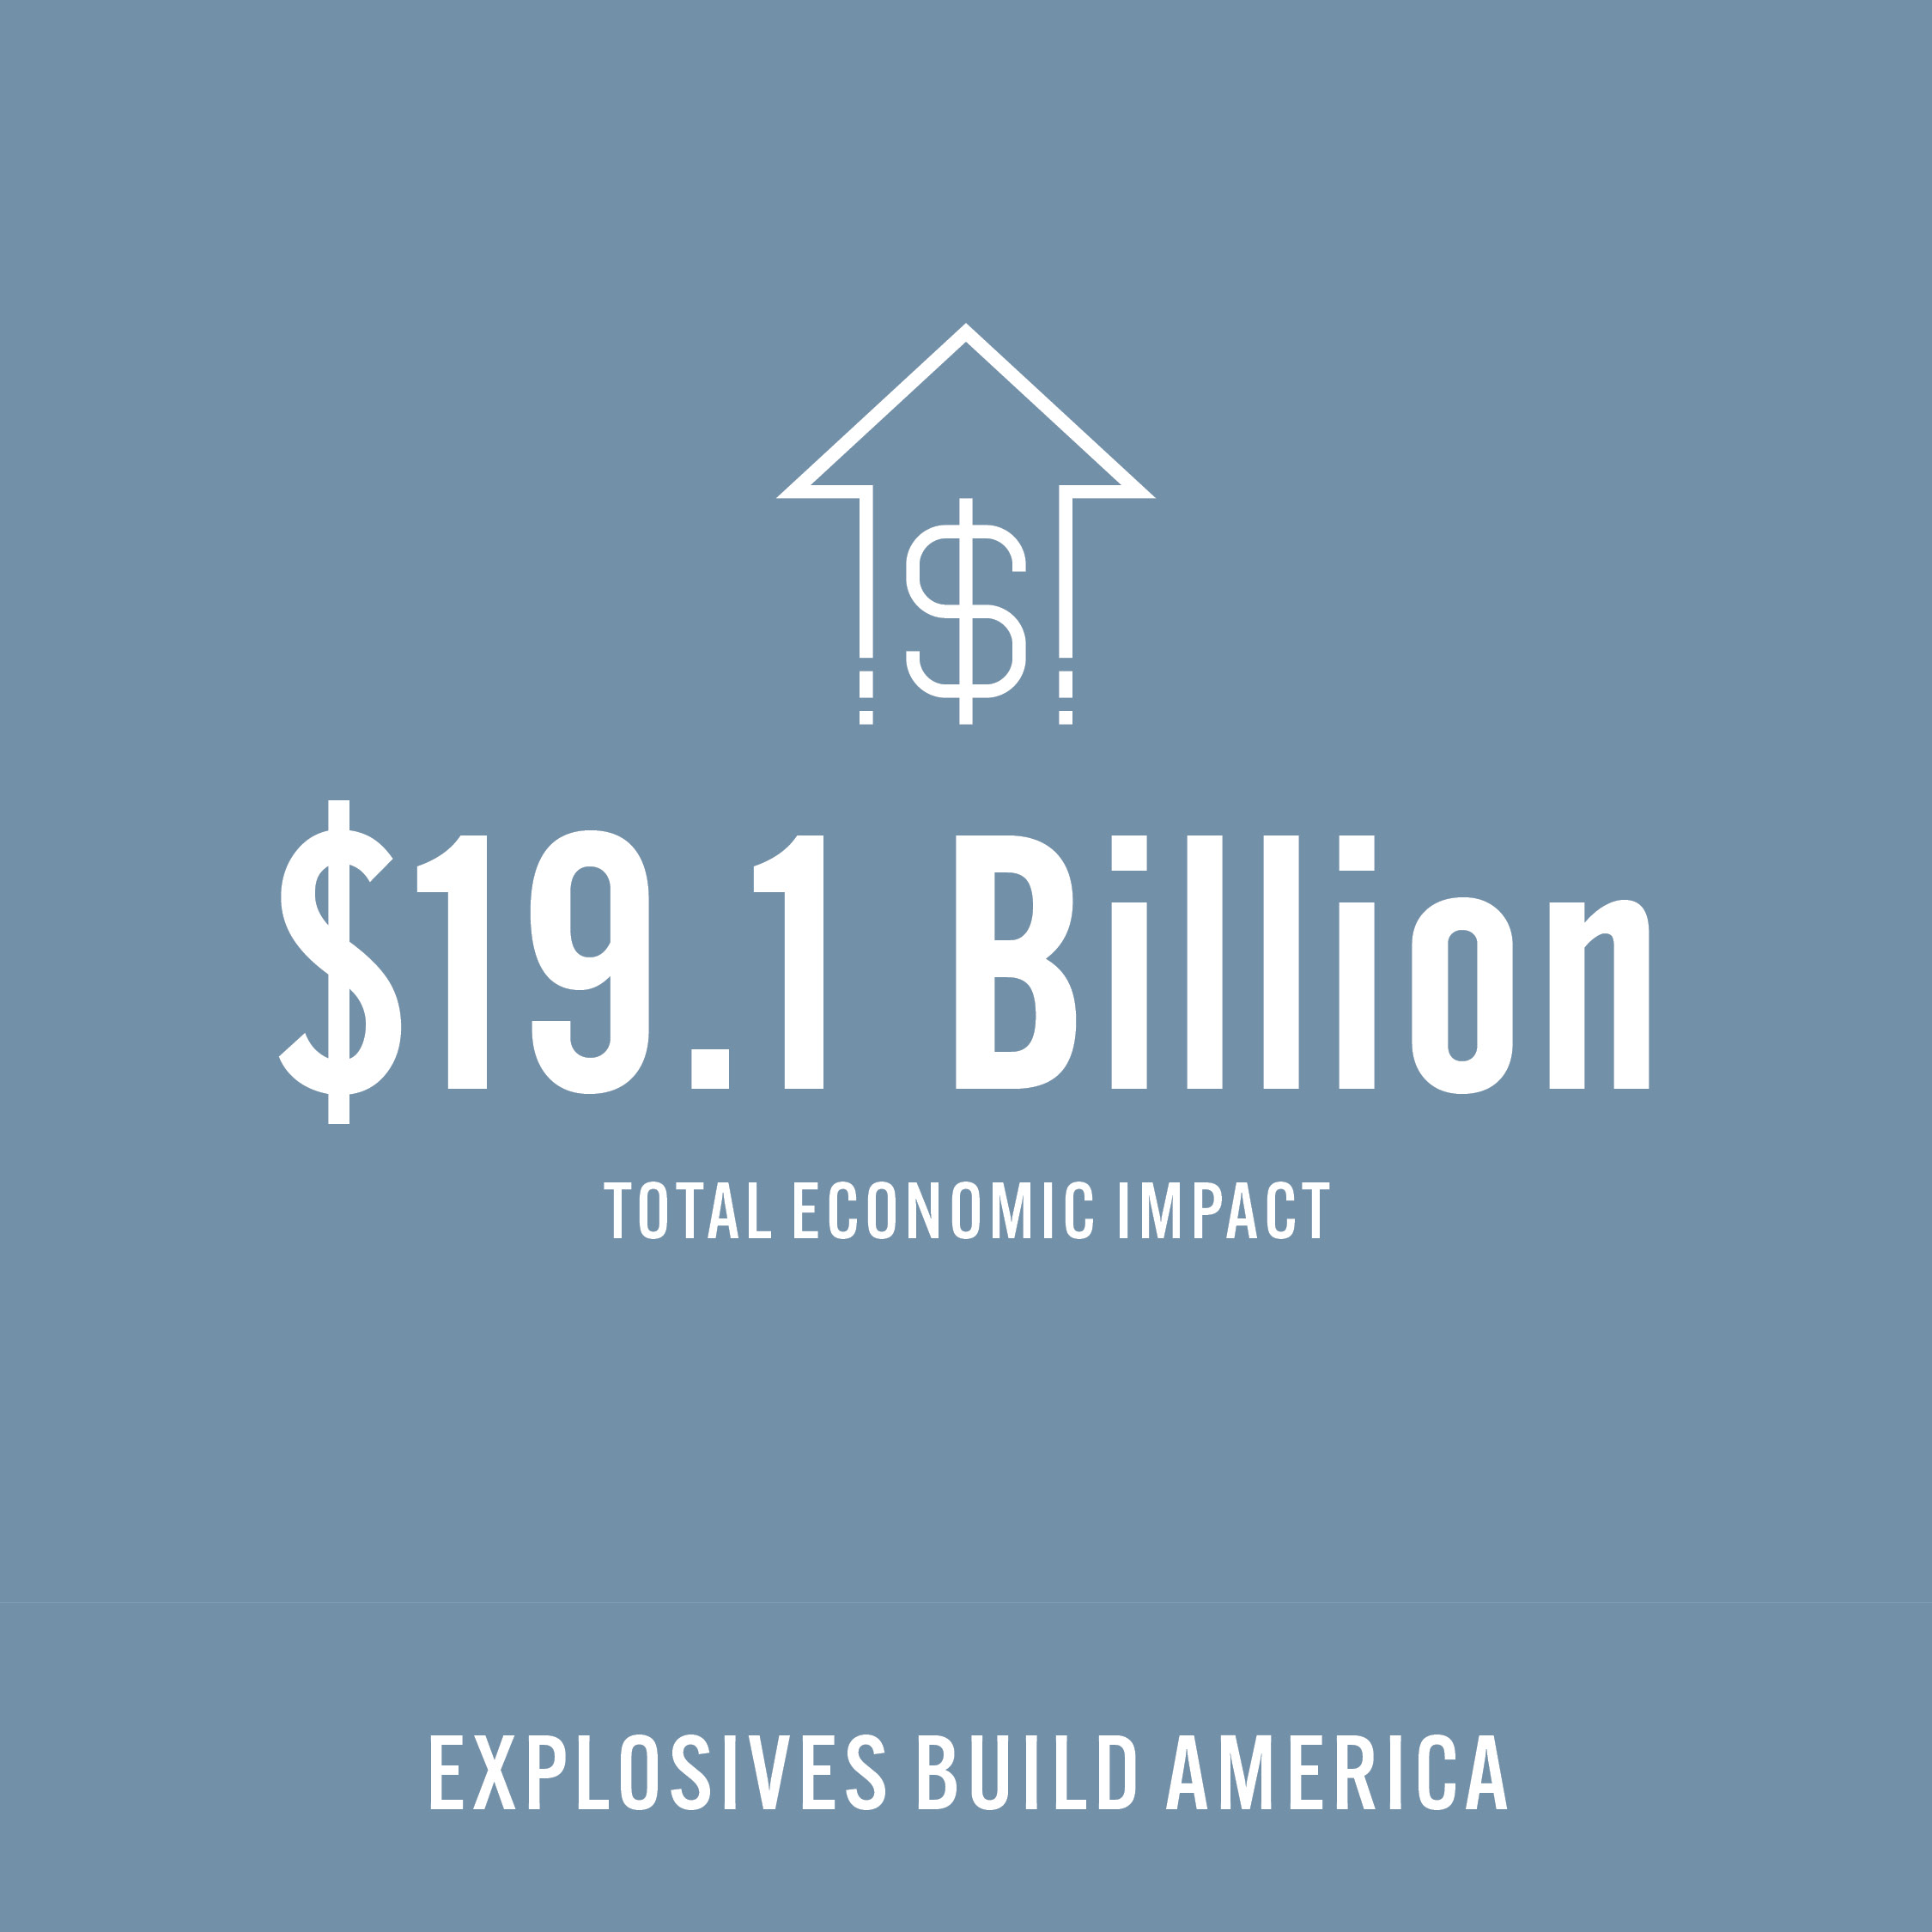 Explosives Build America:  Economic Impact Study Highlights Critical Role of Commercial Explosives in Building the U.S. Economy